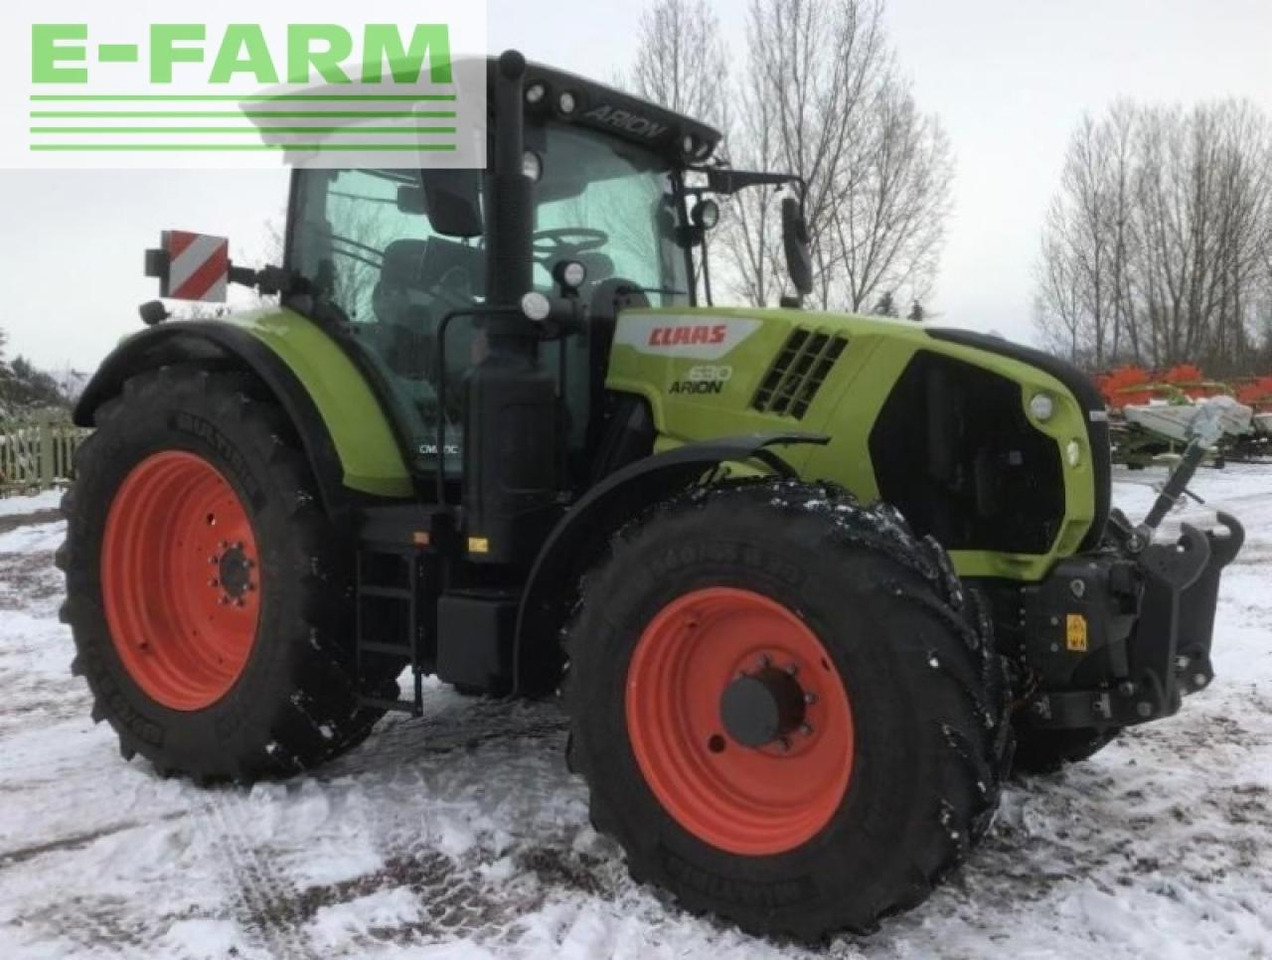 Farm tractor CLAAS arion 630 cmatic stage v